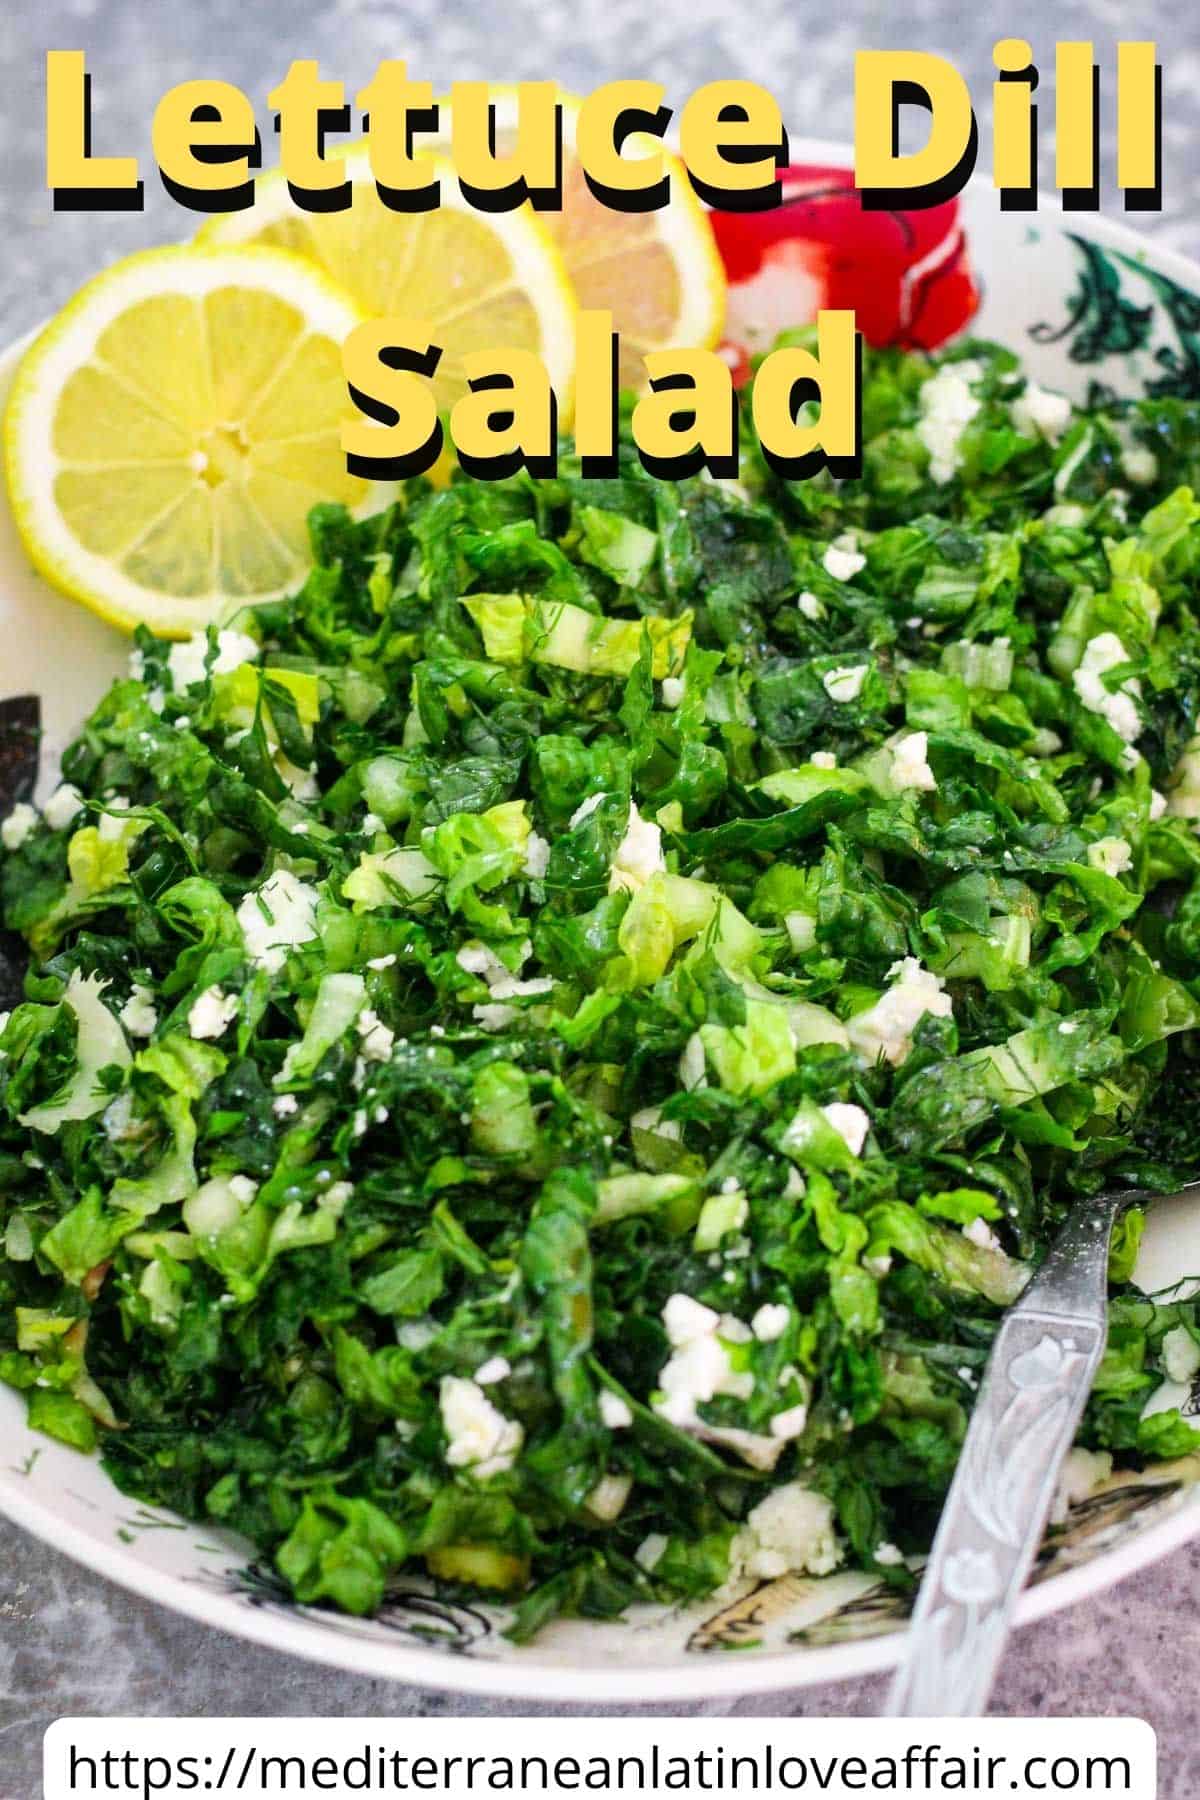 An image prepared for Pinterest, it shows a lettuce dill salad with feta cheese and lemon slices on a salad bowl. There's a title bar on top and a website link at the bottom.